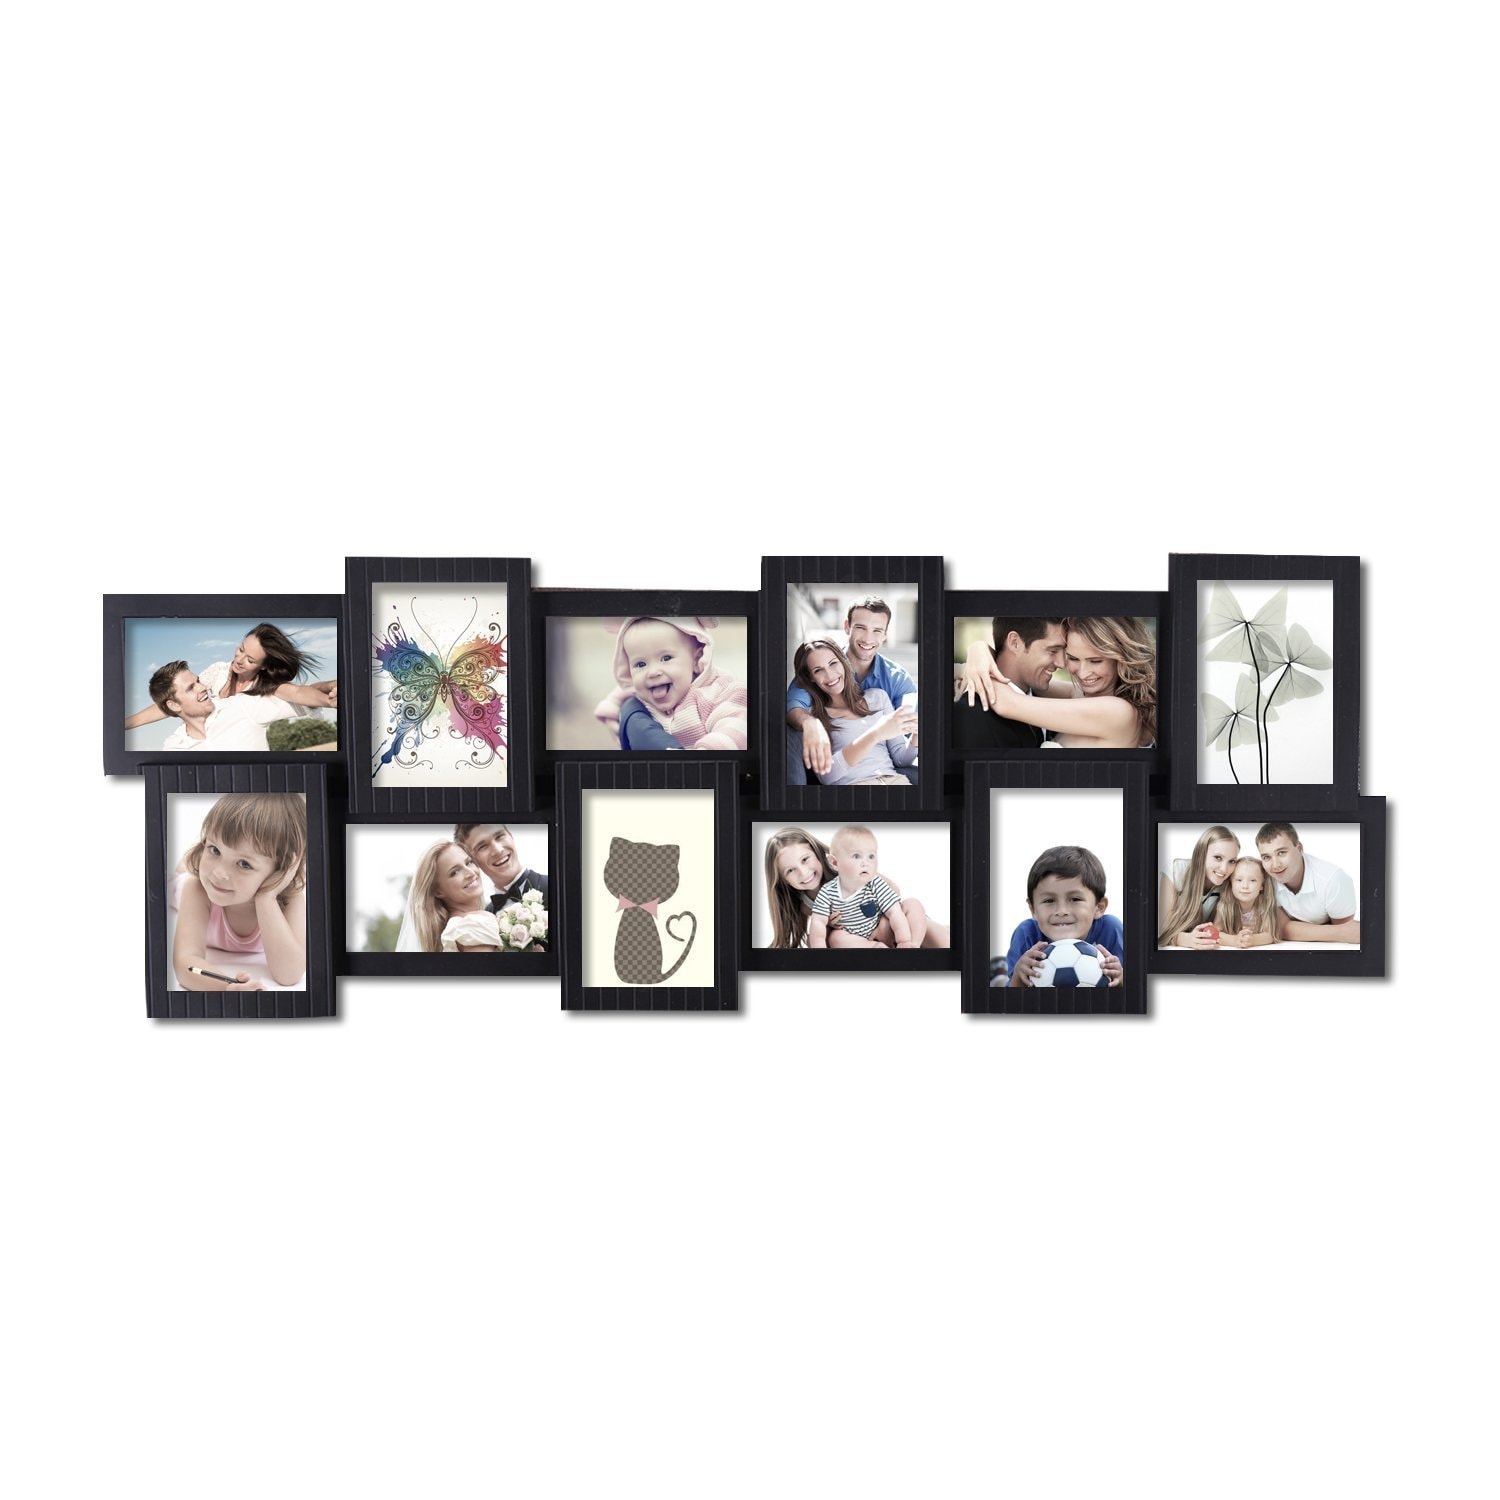 Adeco 12 opening 4x6 Black Plastic Wall Hanging Collage Picture Photo Frame Black Size 4x6